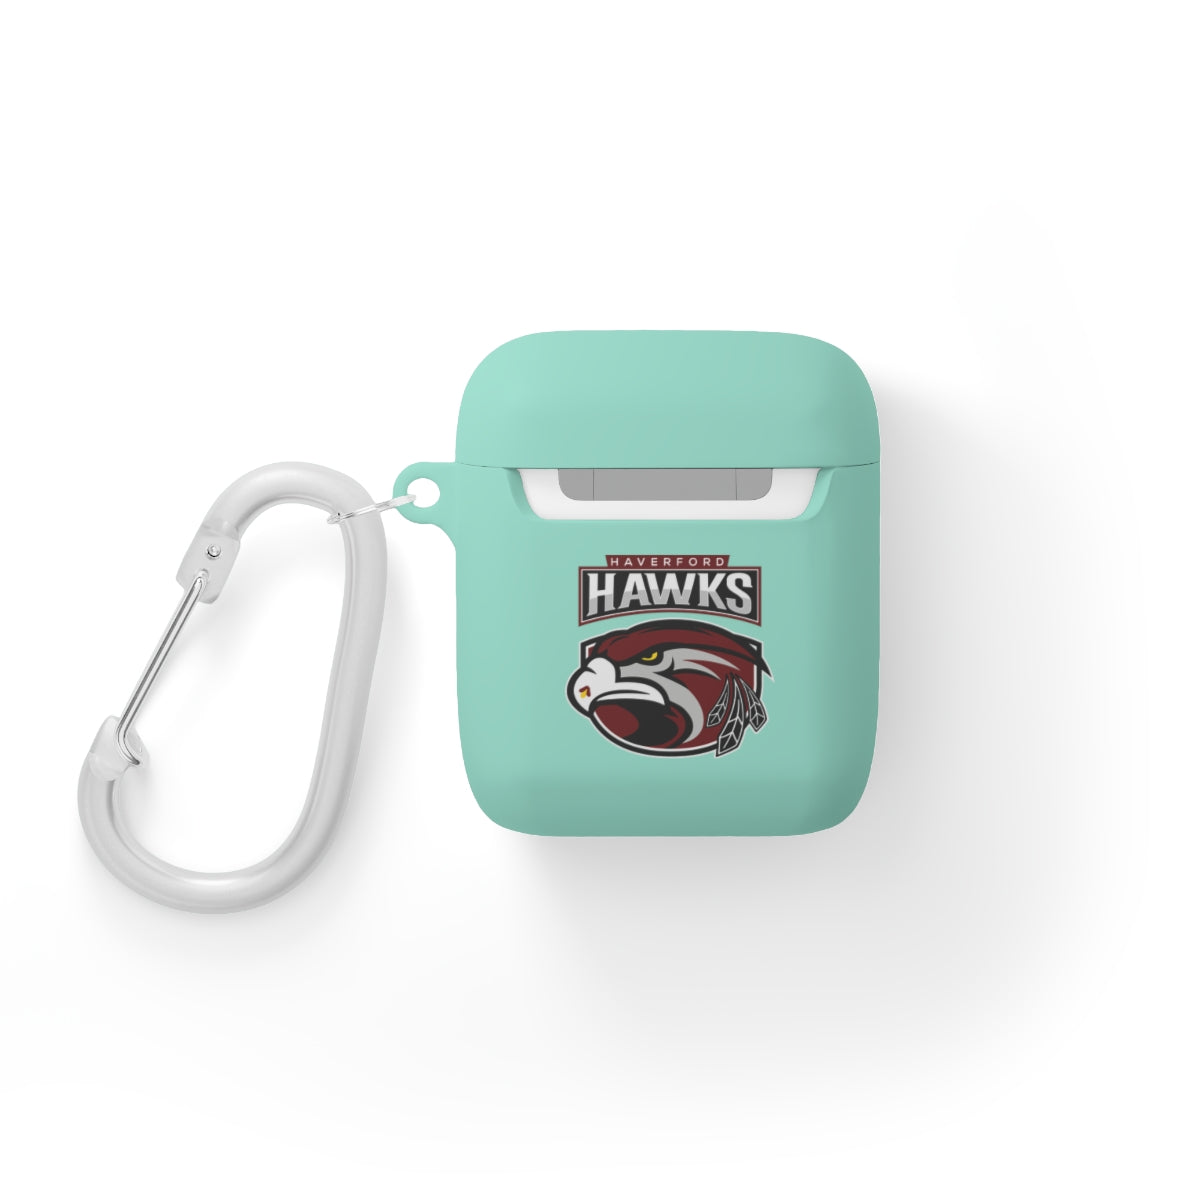 Hawks AirPods and AirPods Pro Case Cover